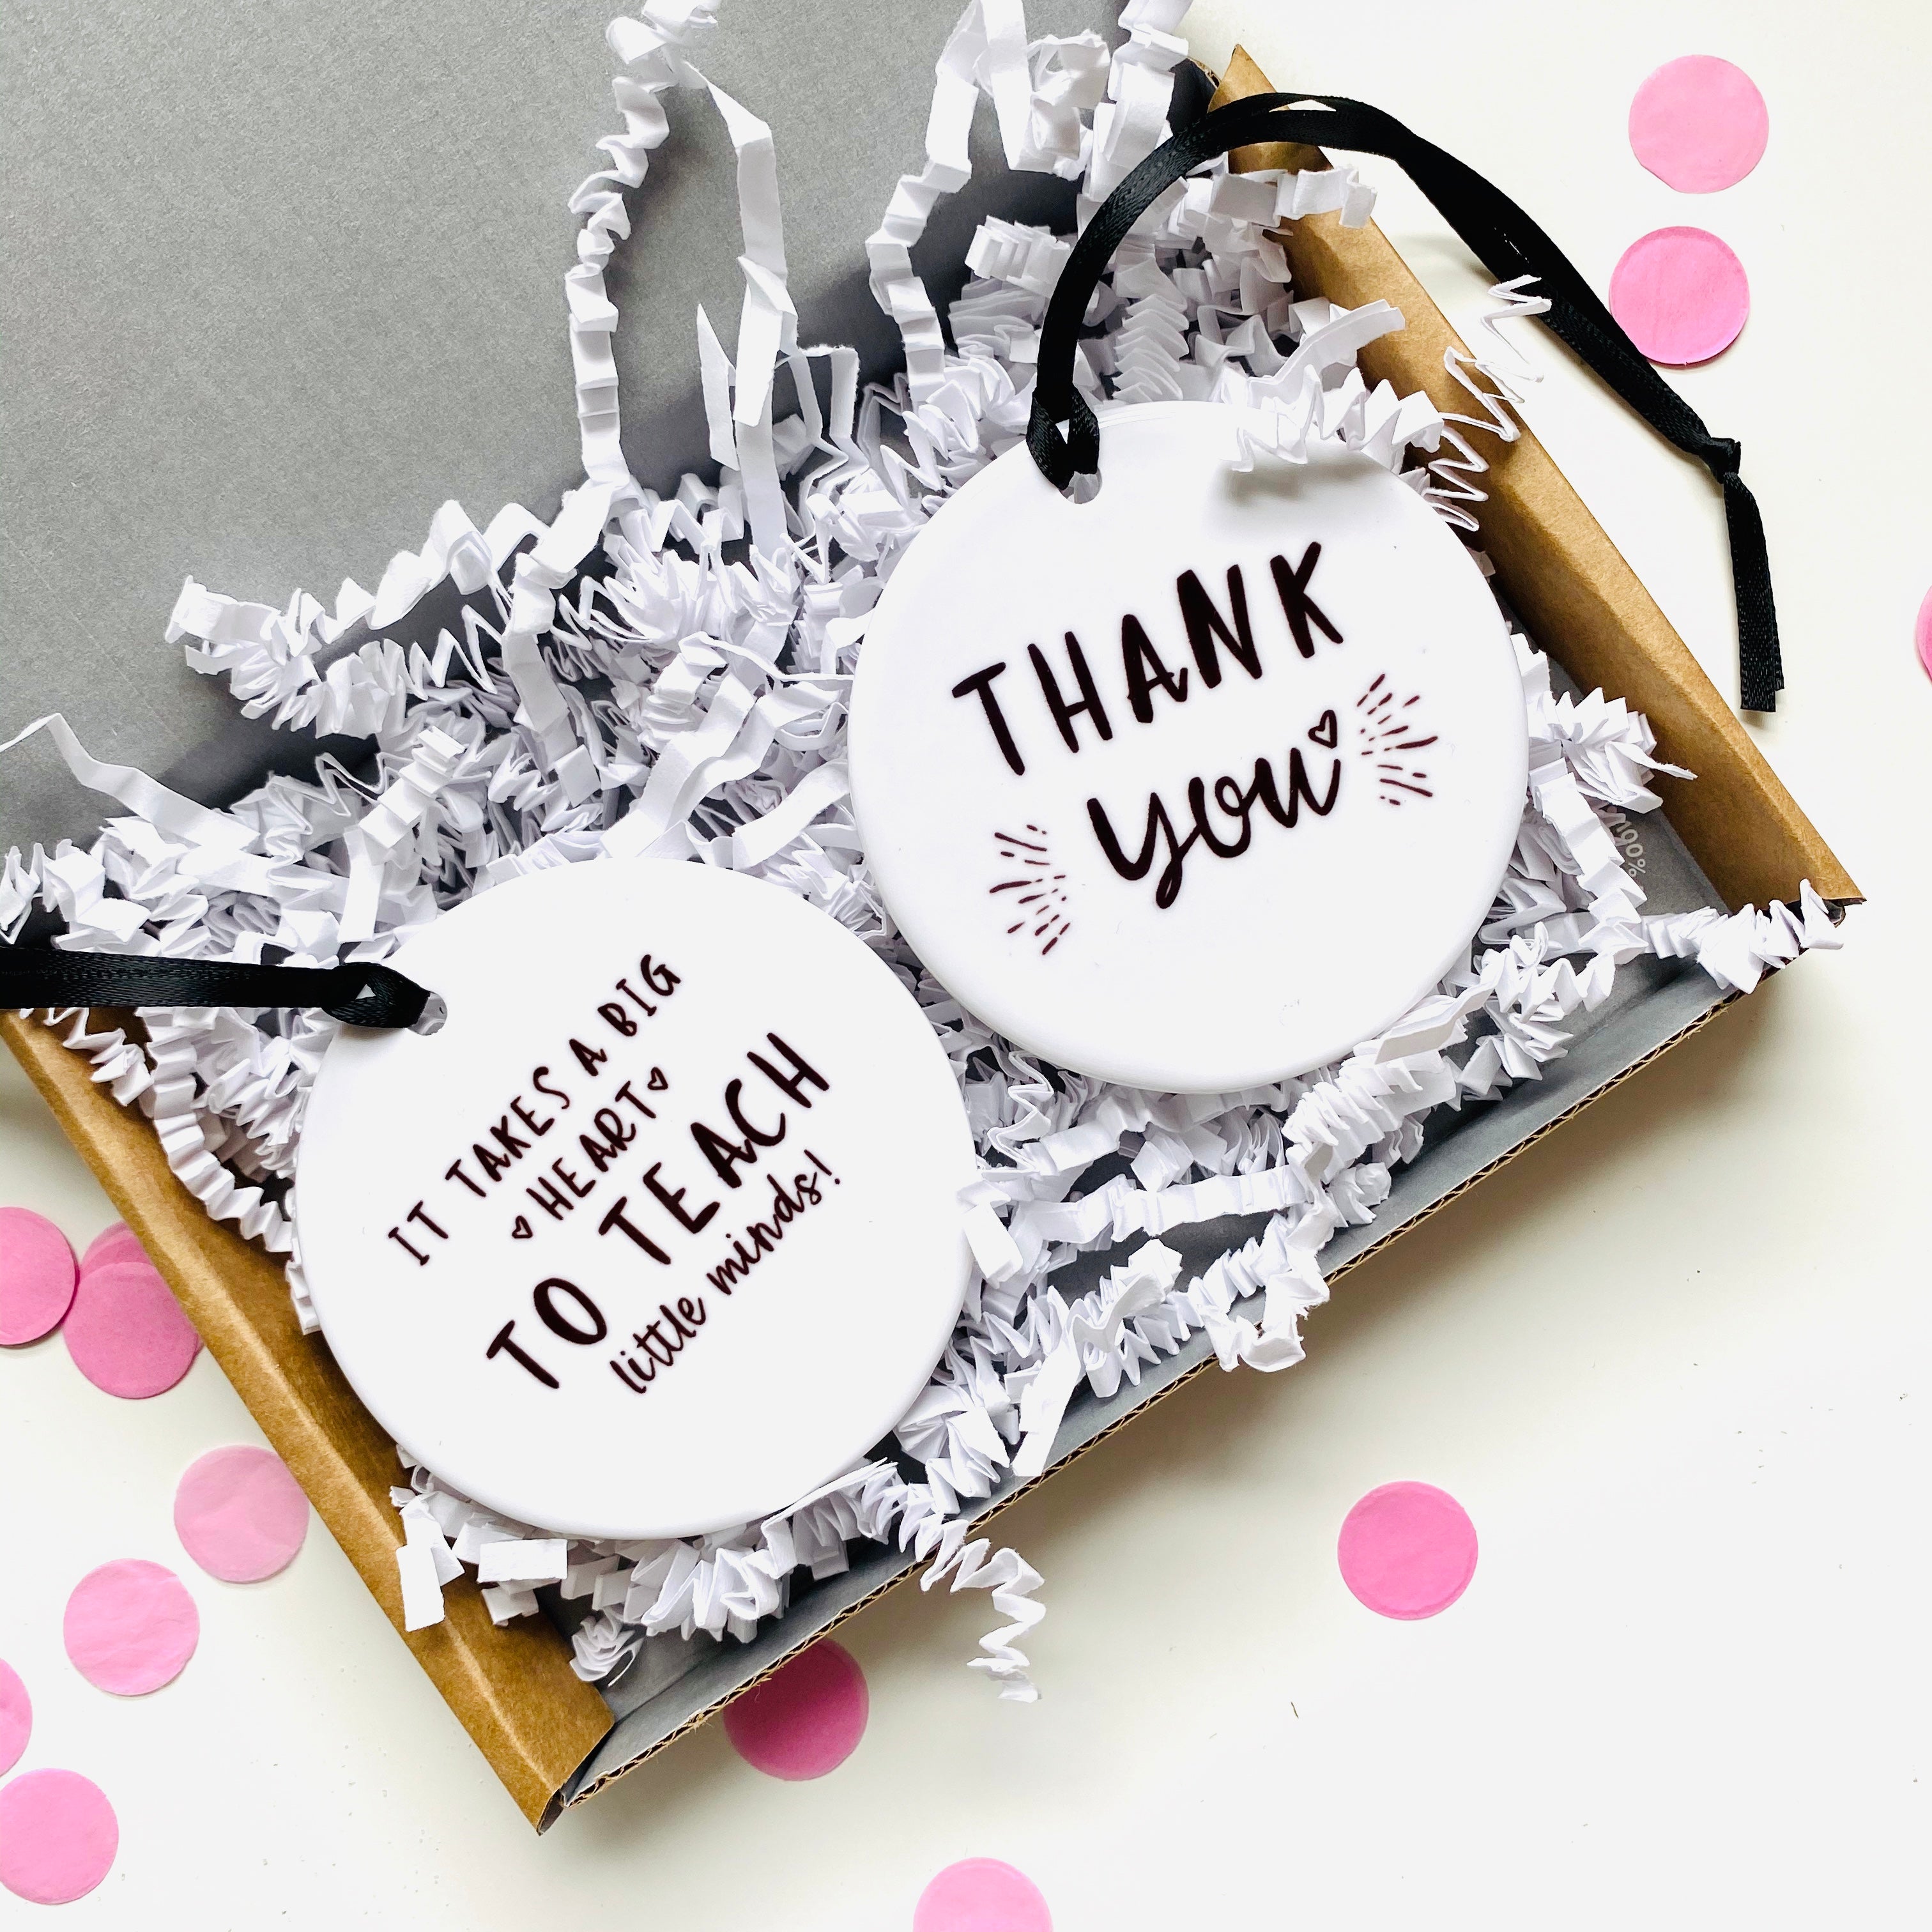 Show your gratitude and thank that special Teacher at the end of the term with our selection of Ready-to-go gift boxes that can be delivered directly to the school. Shop unique gifts and more with TreatBox..